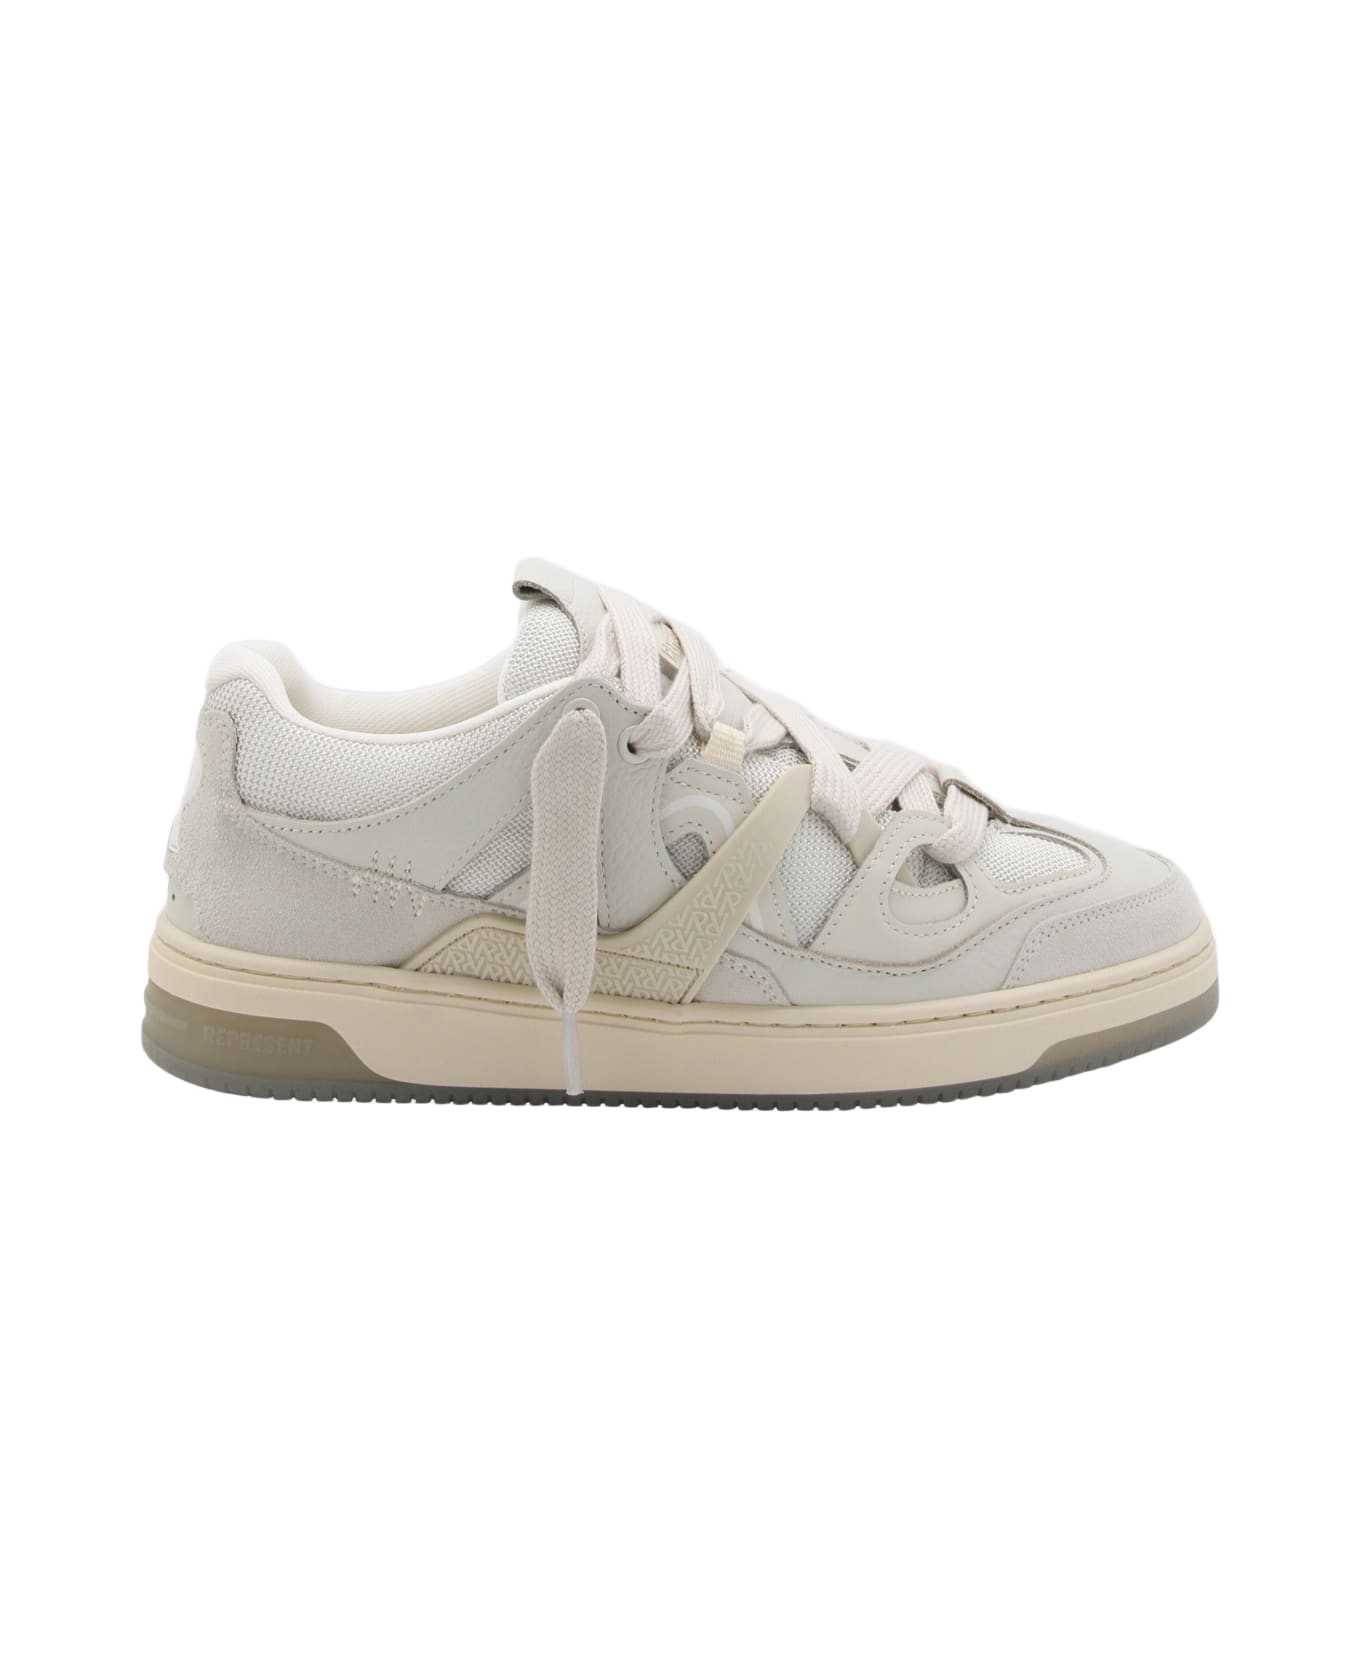 REPRESENT White Leather Sneakers - FLAT WHITE スニーカー